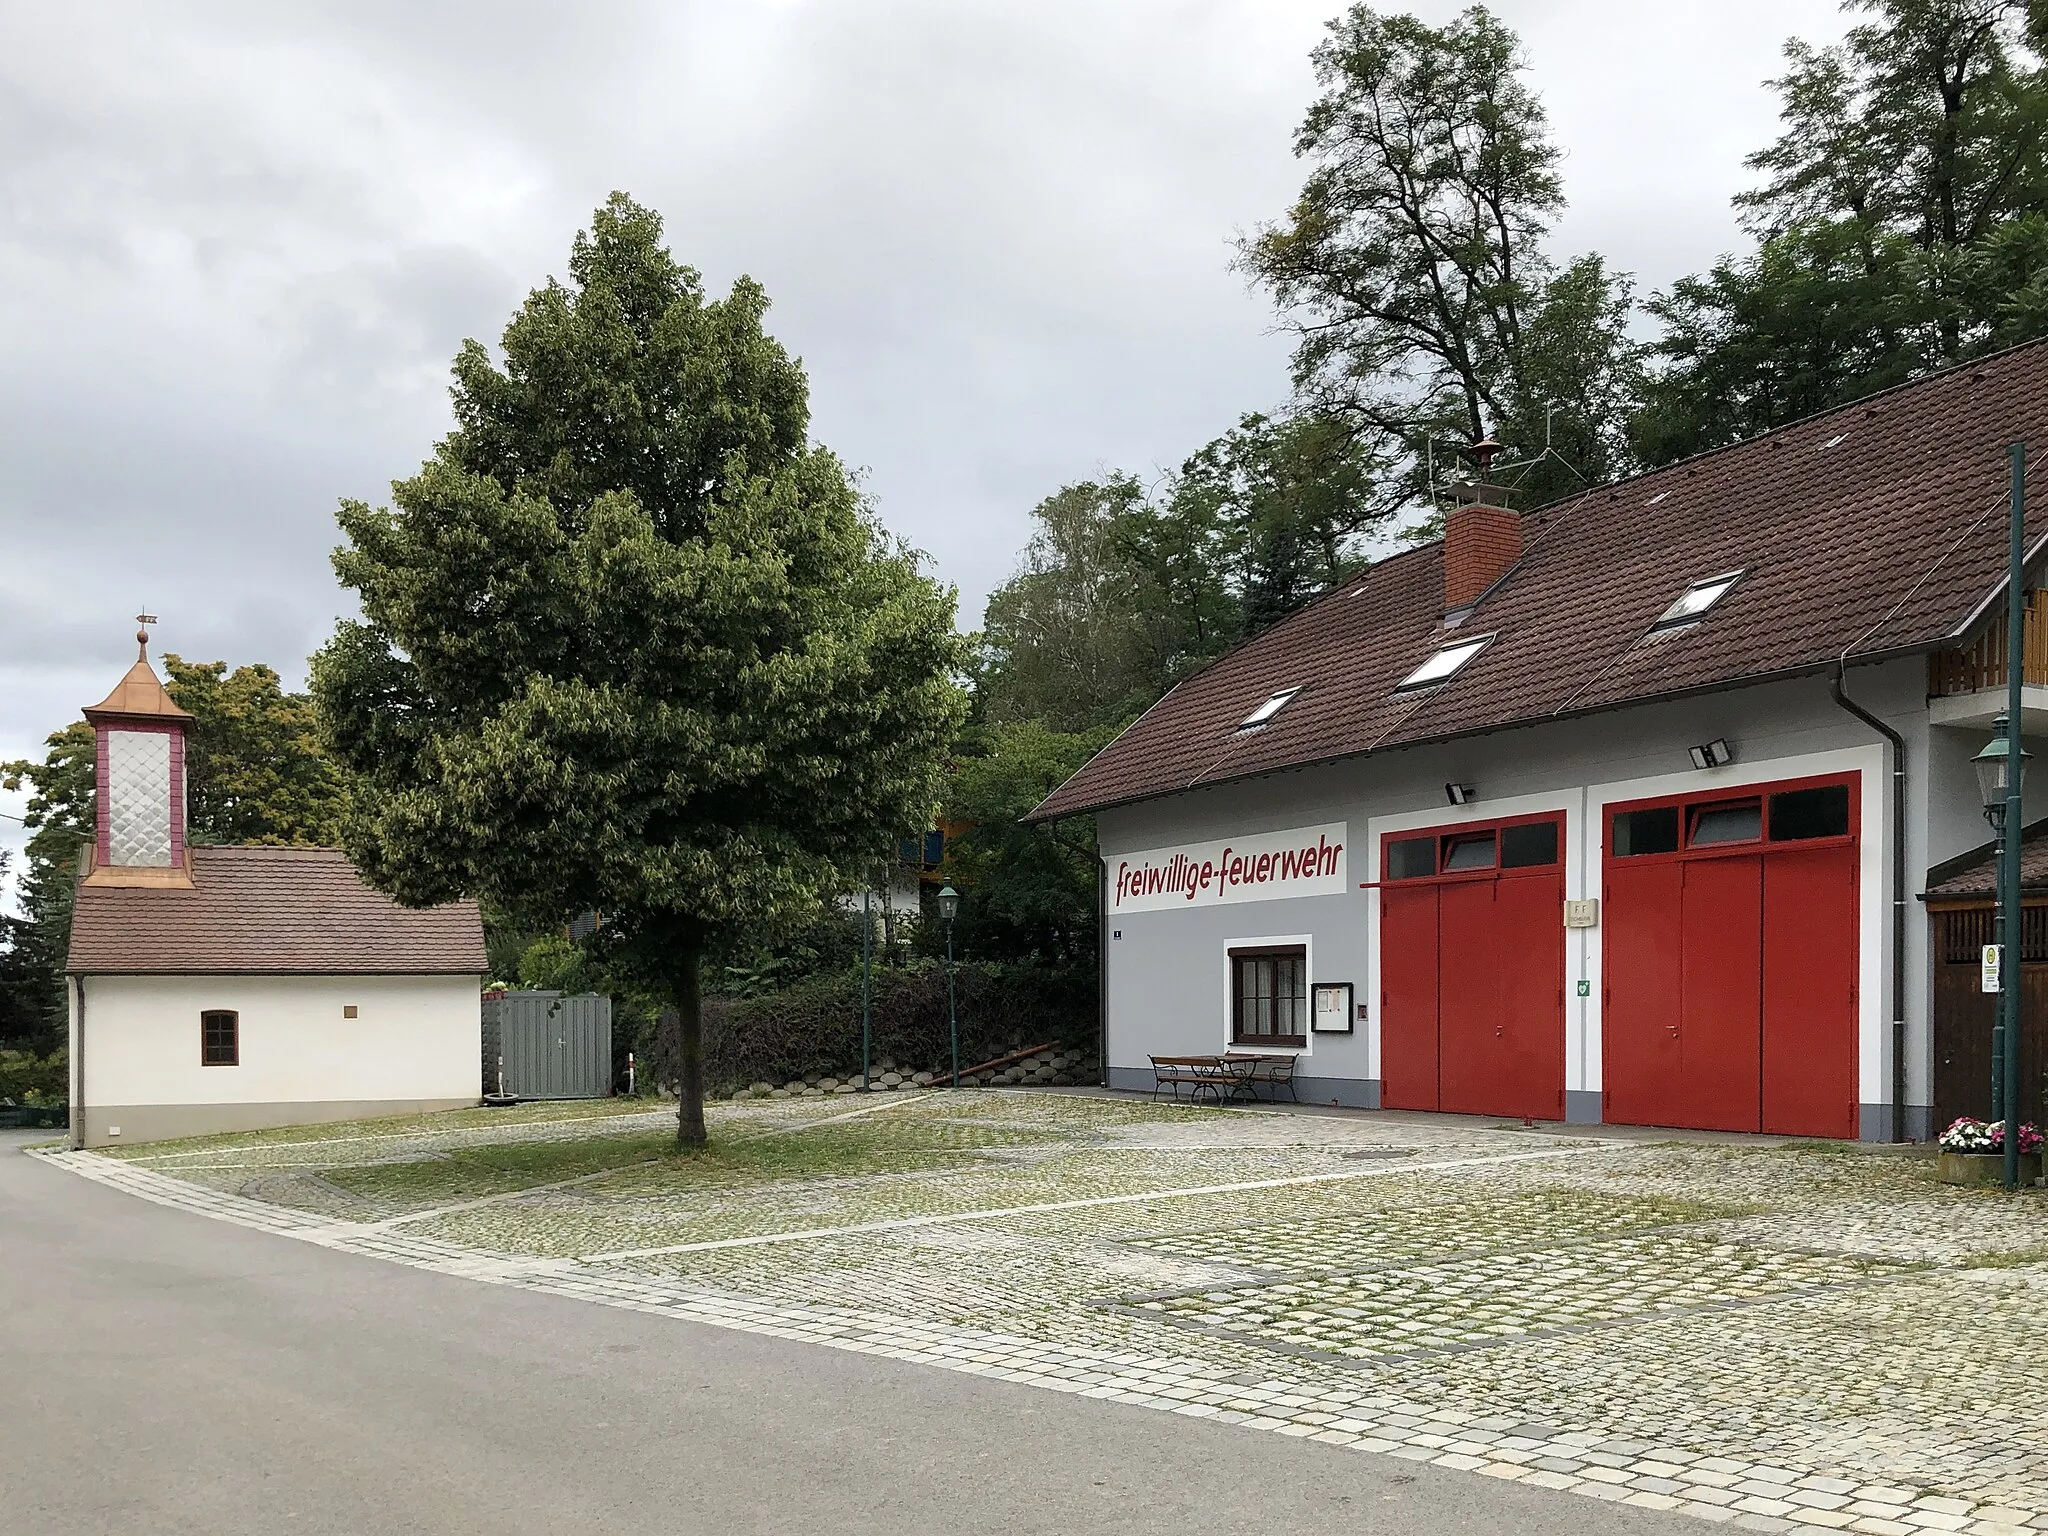 Photo showing: Old and new fire station in Eichbüchl, Katzelsdorf municipality, Lower Austria